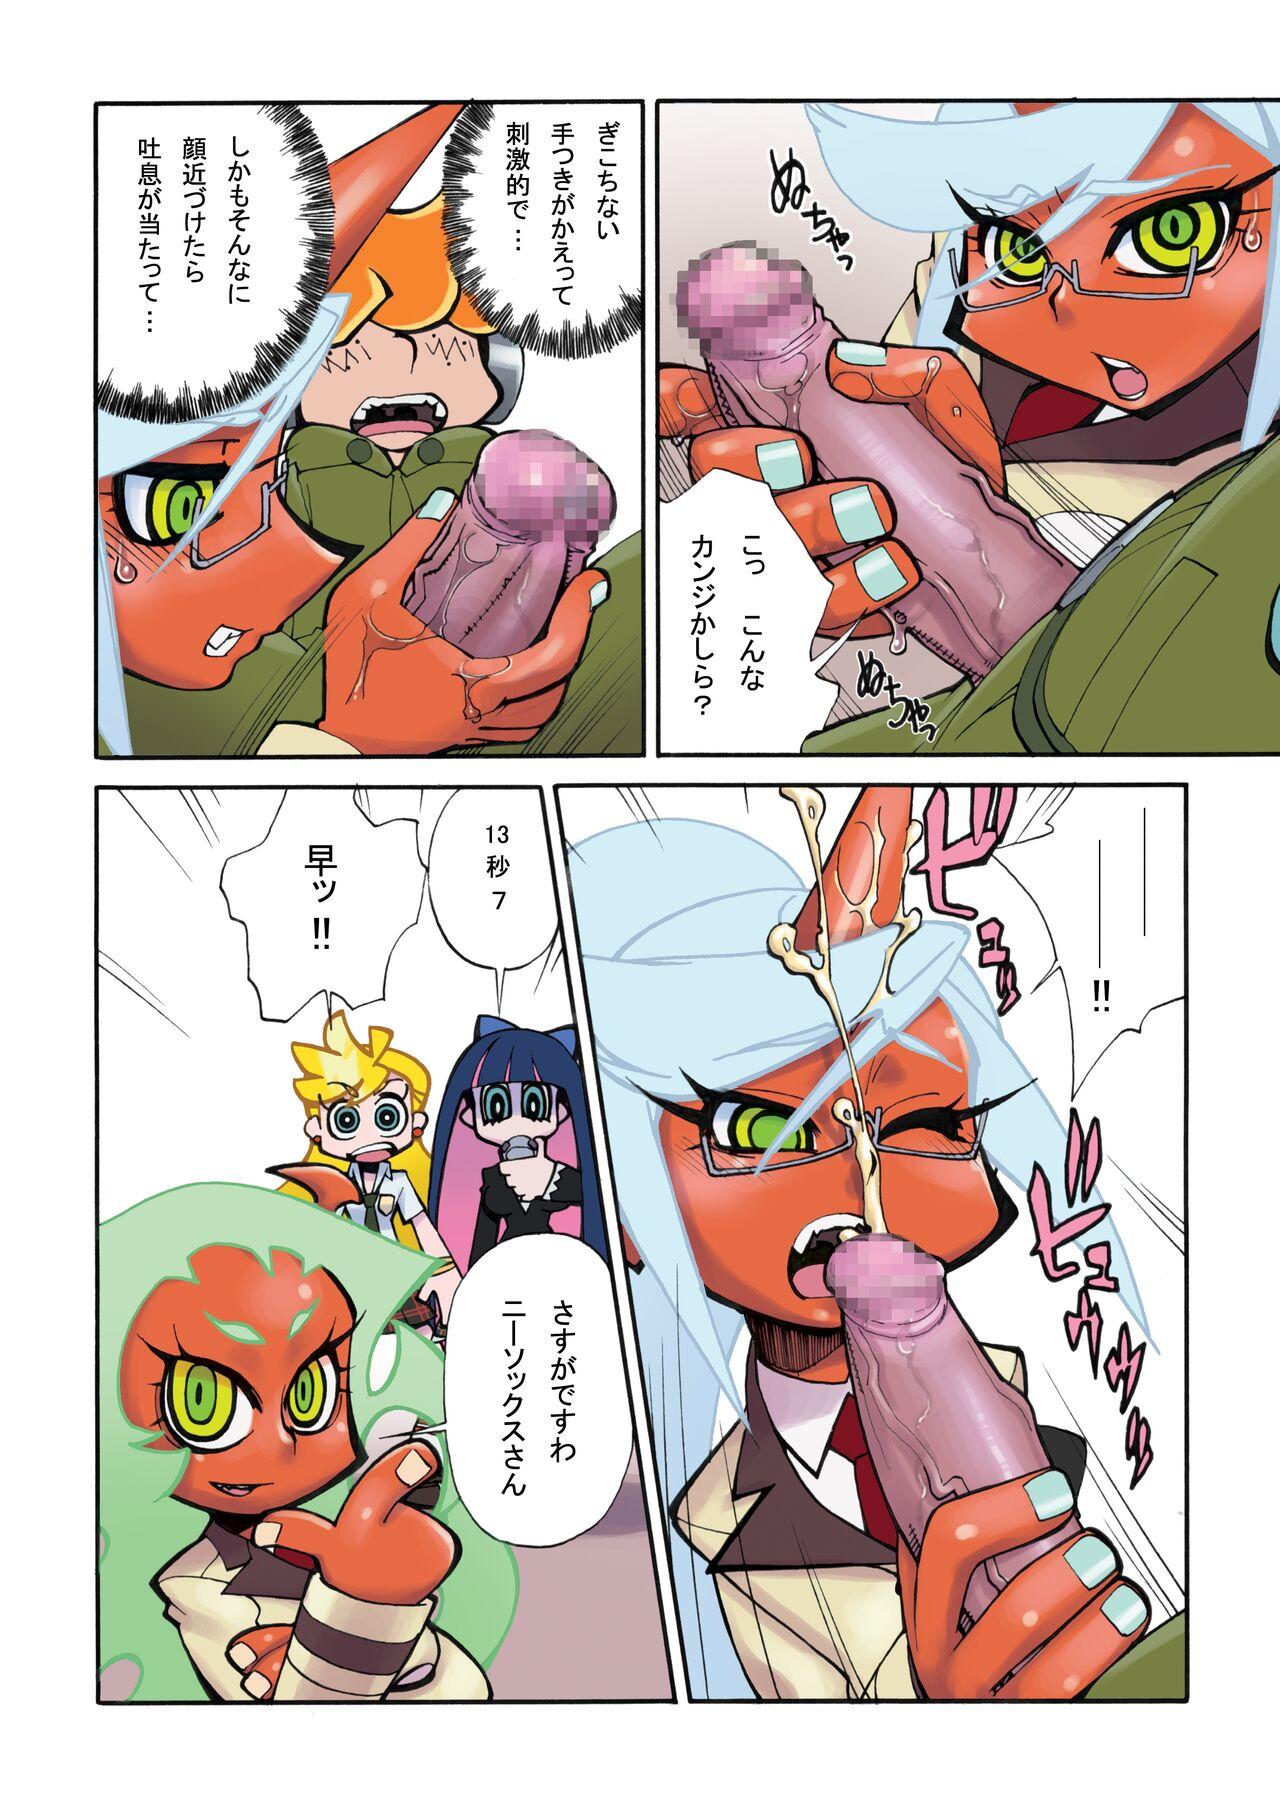 Reality PT&NS - Panty and stocking with garterbelt Fodendo - Page 4